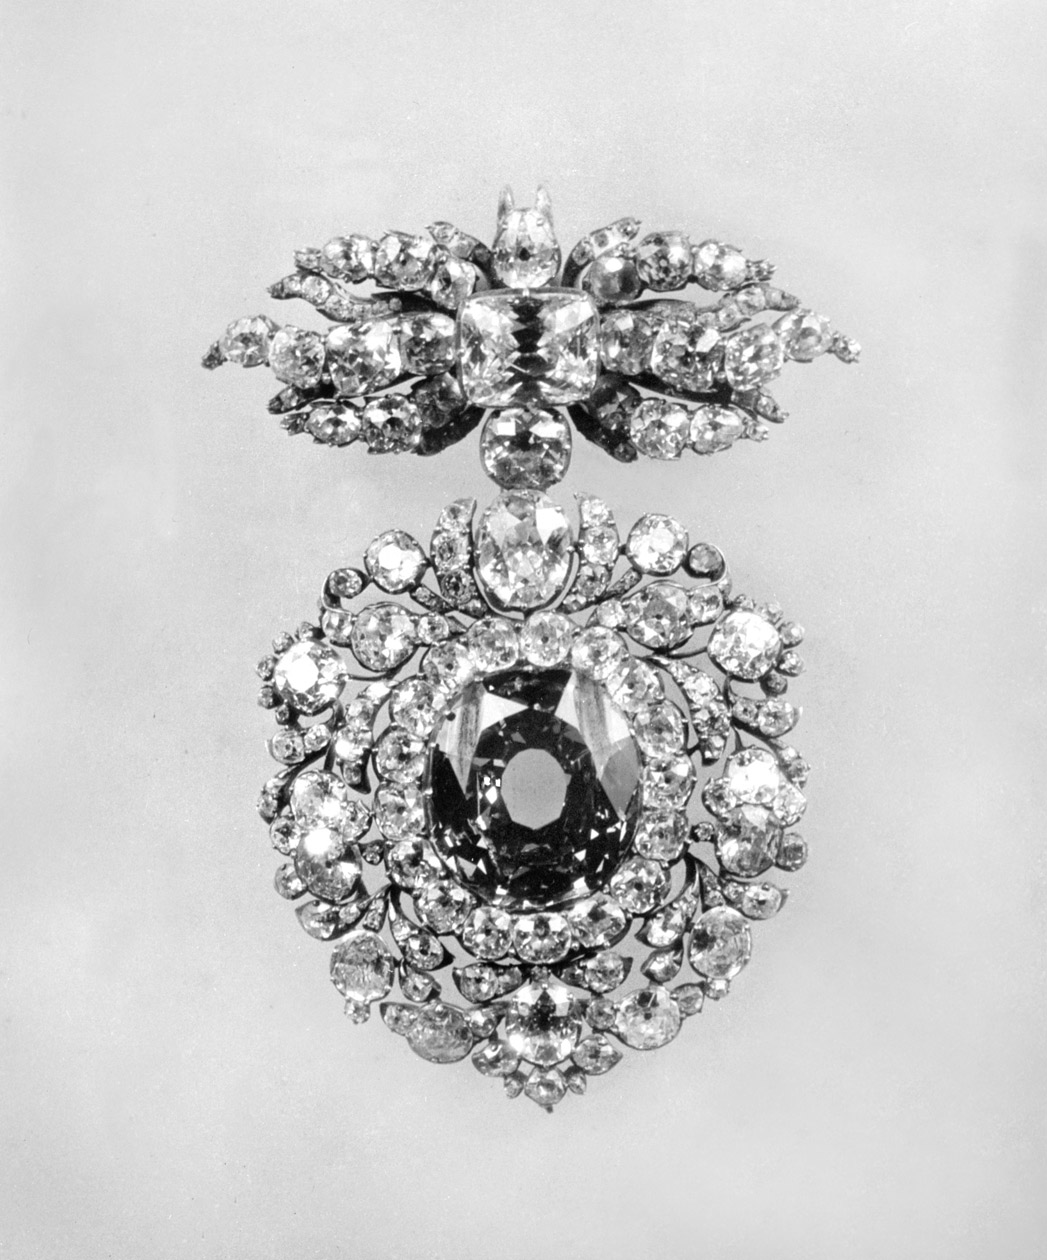 The famous Wittelsbach Blue Diamond, brought into the Wittelsbach family by Maria Amelia of Austria on her marriage to Charles Albert Duke of Bavaria in 1722—Part of the collection of the Bavarian Royal Jewels, 1931.